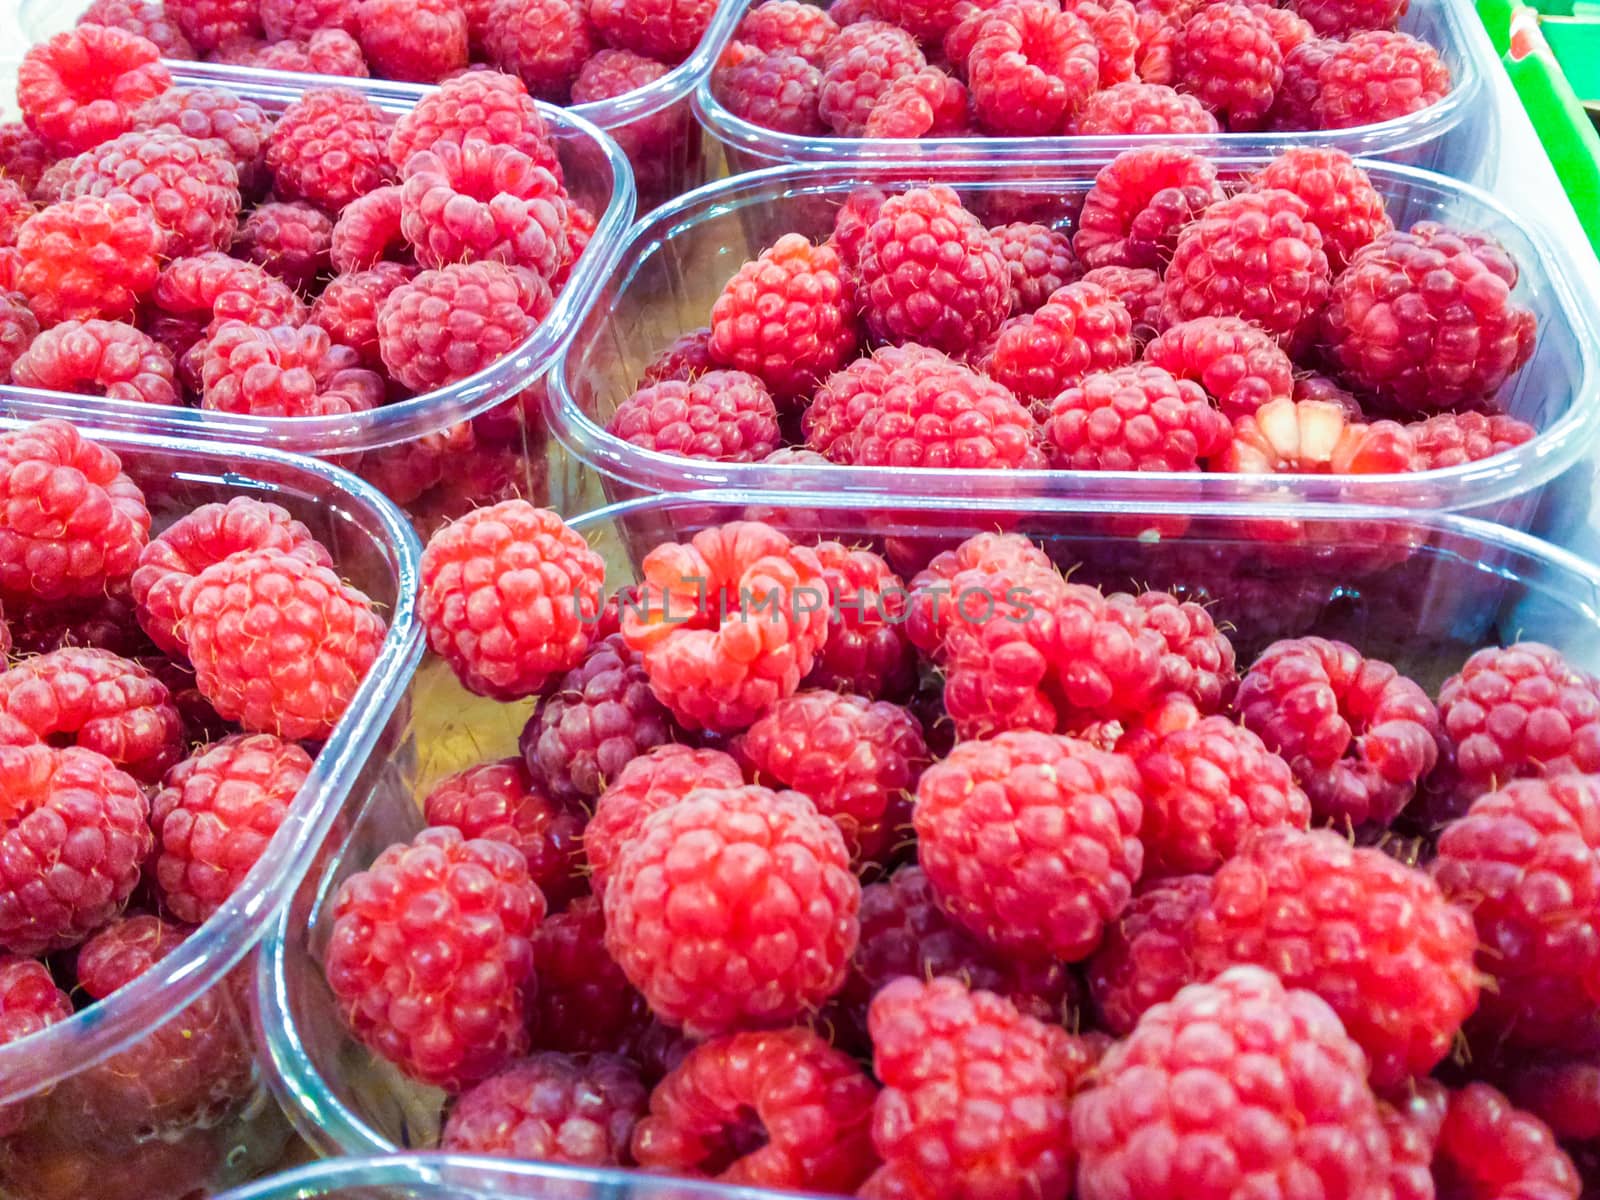 Closeup of raspberries in plastic containers at marketplace